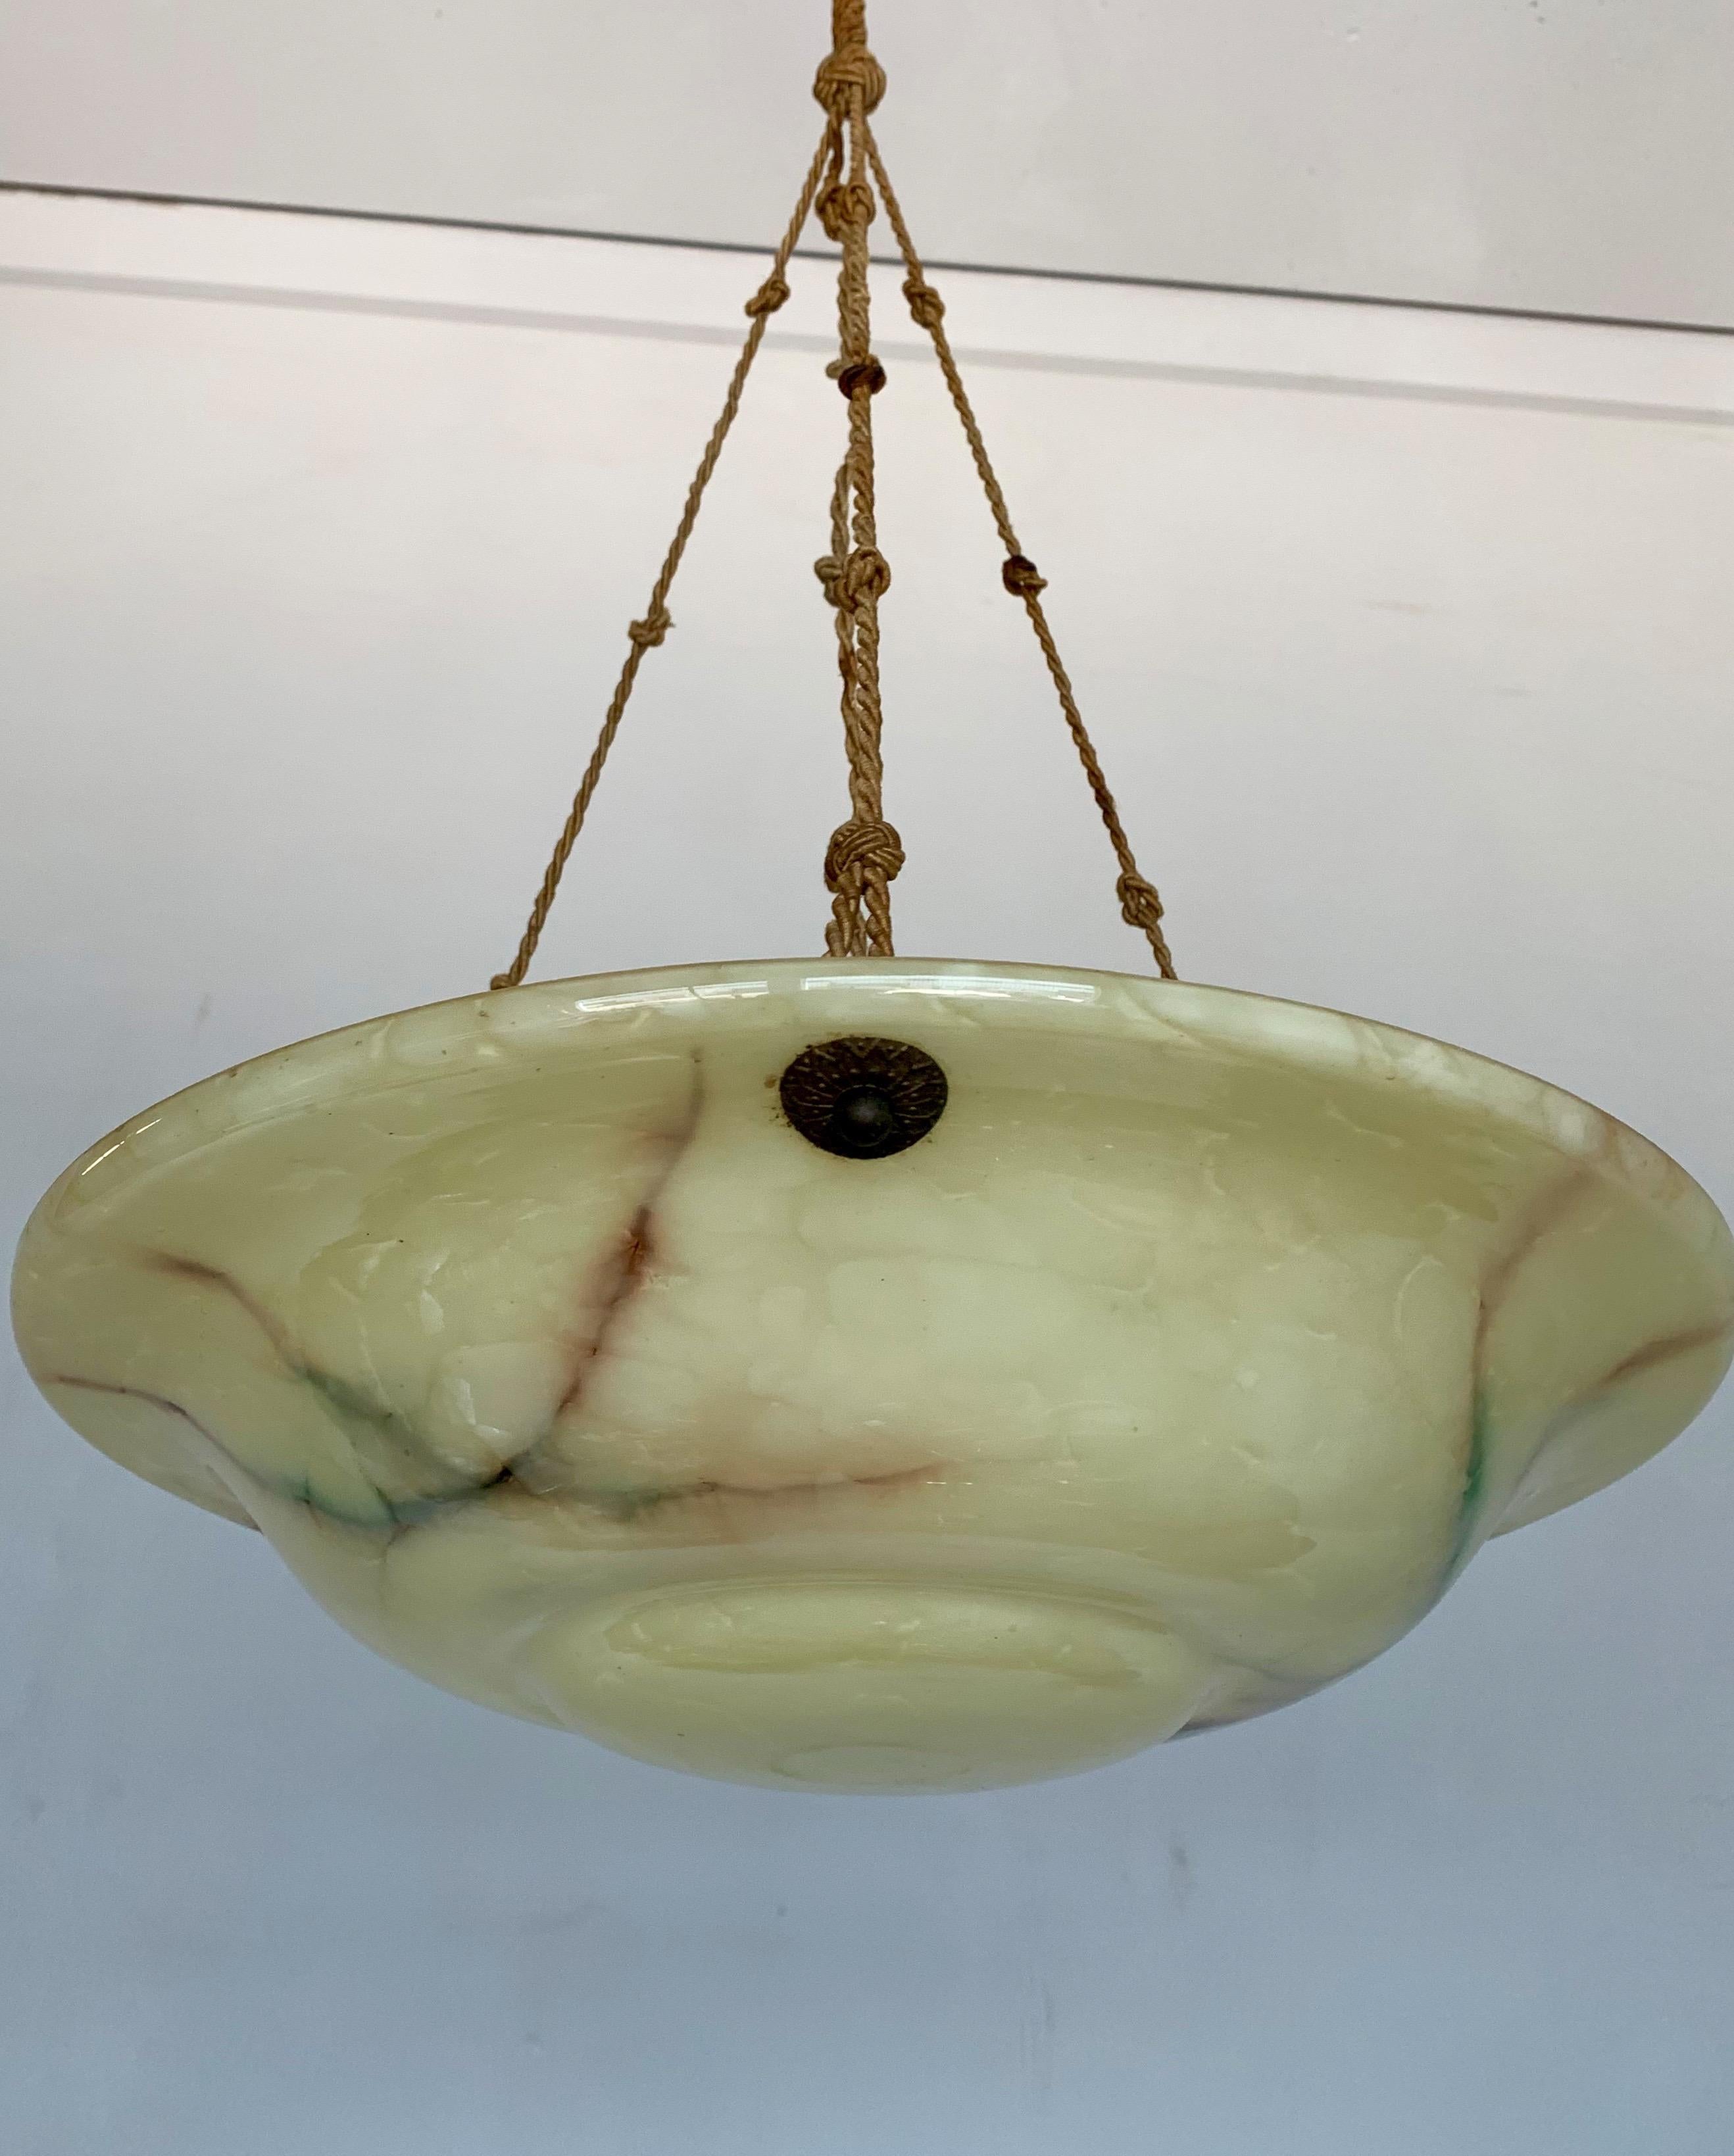 20th Century Great Shape, Size and Color, 1920s Art Deco Glass Pendant Light / Ceiling Lamp For Sale